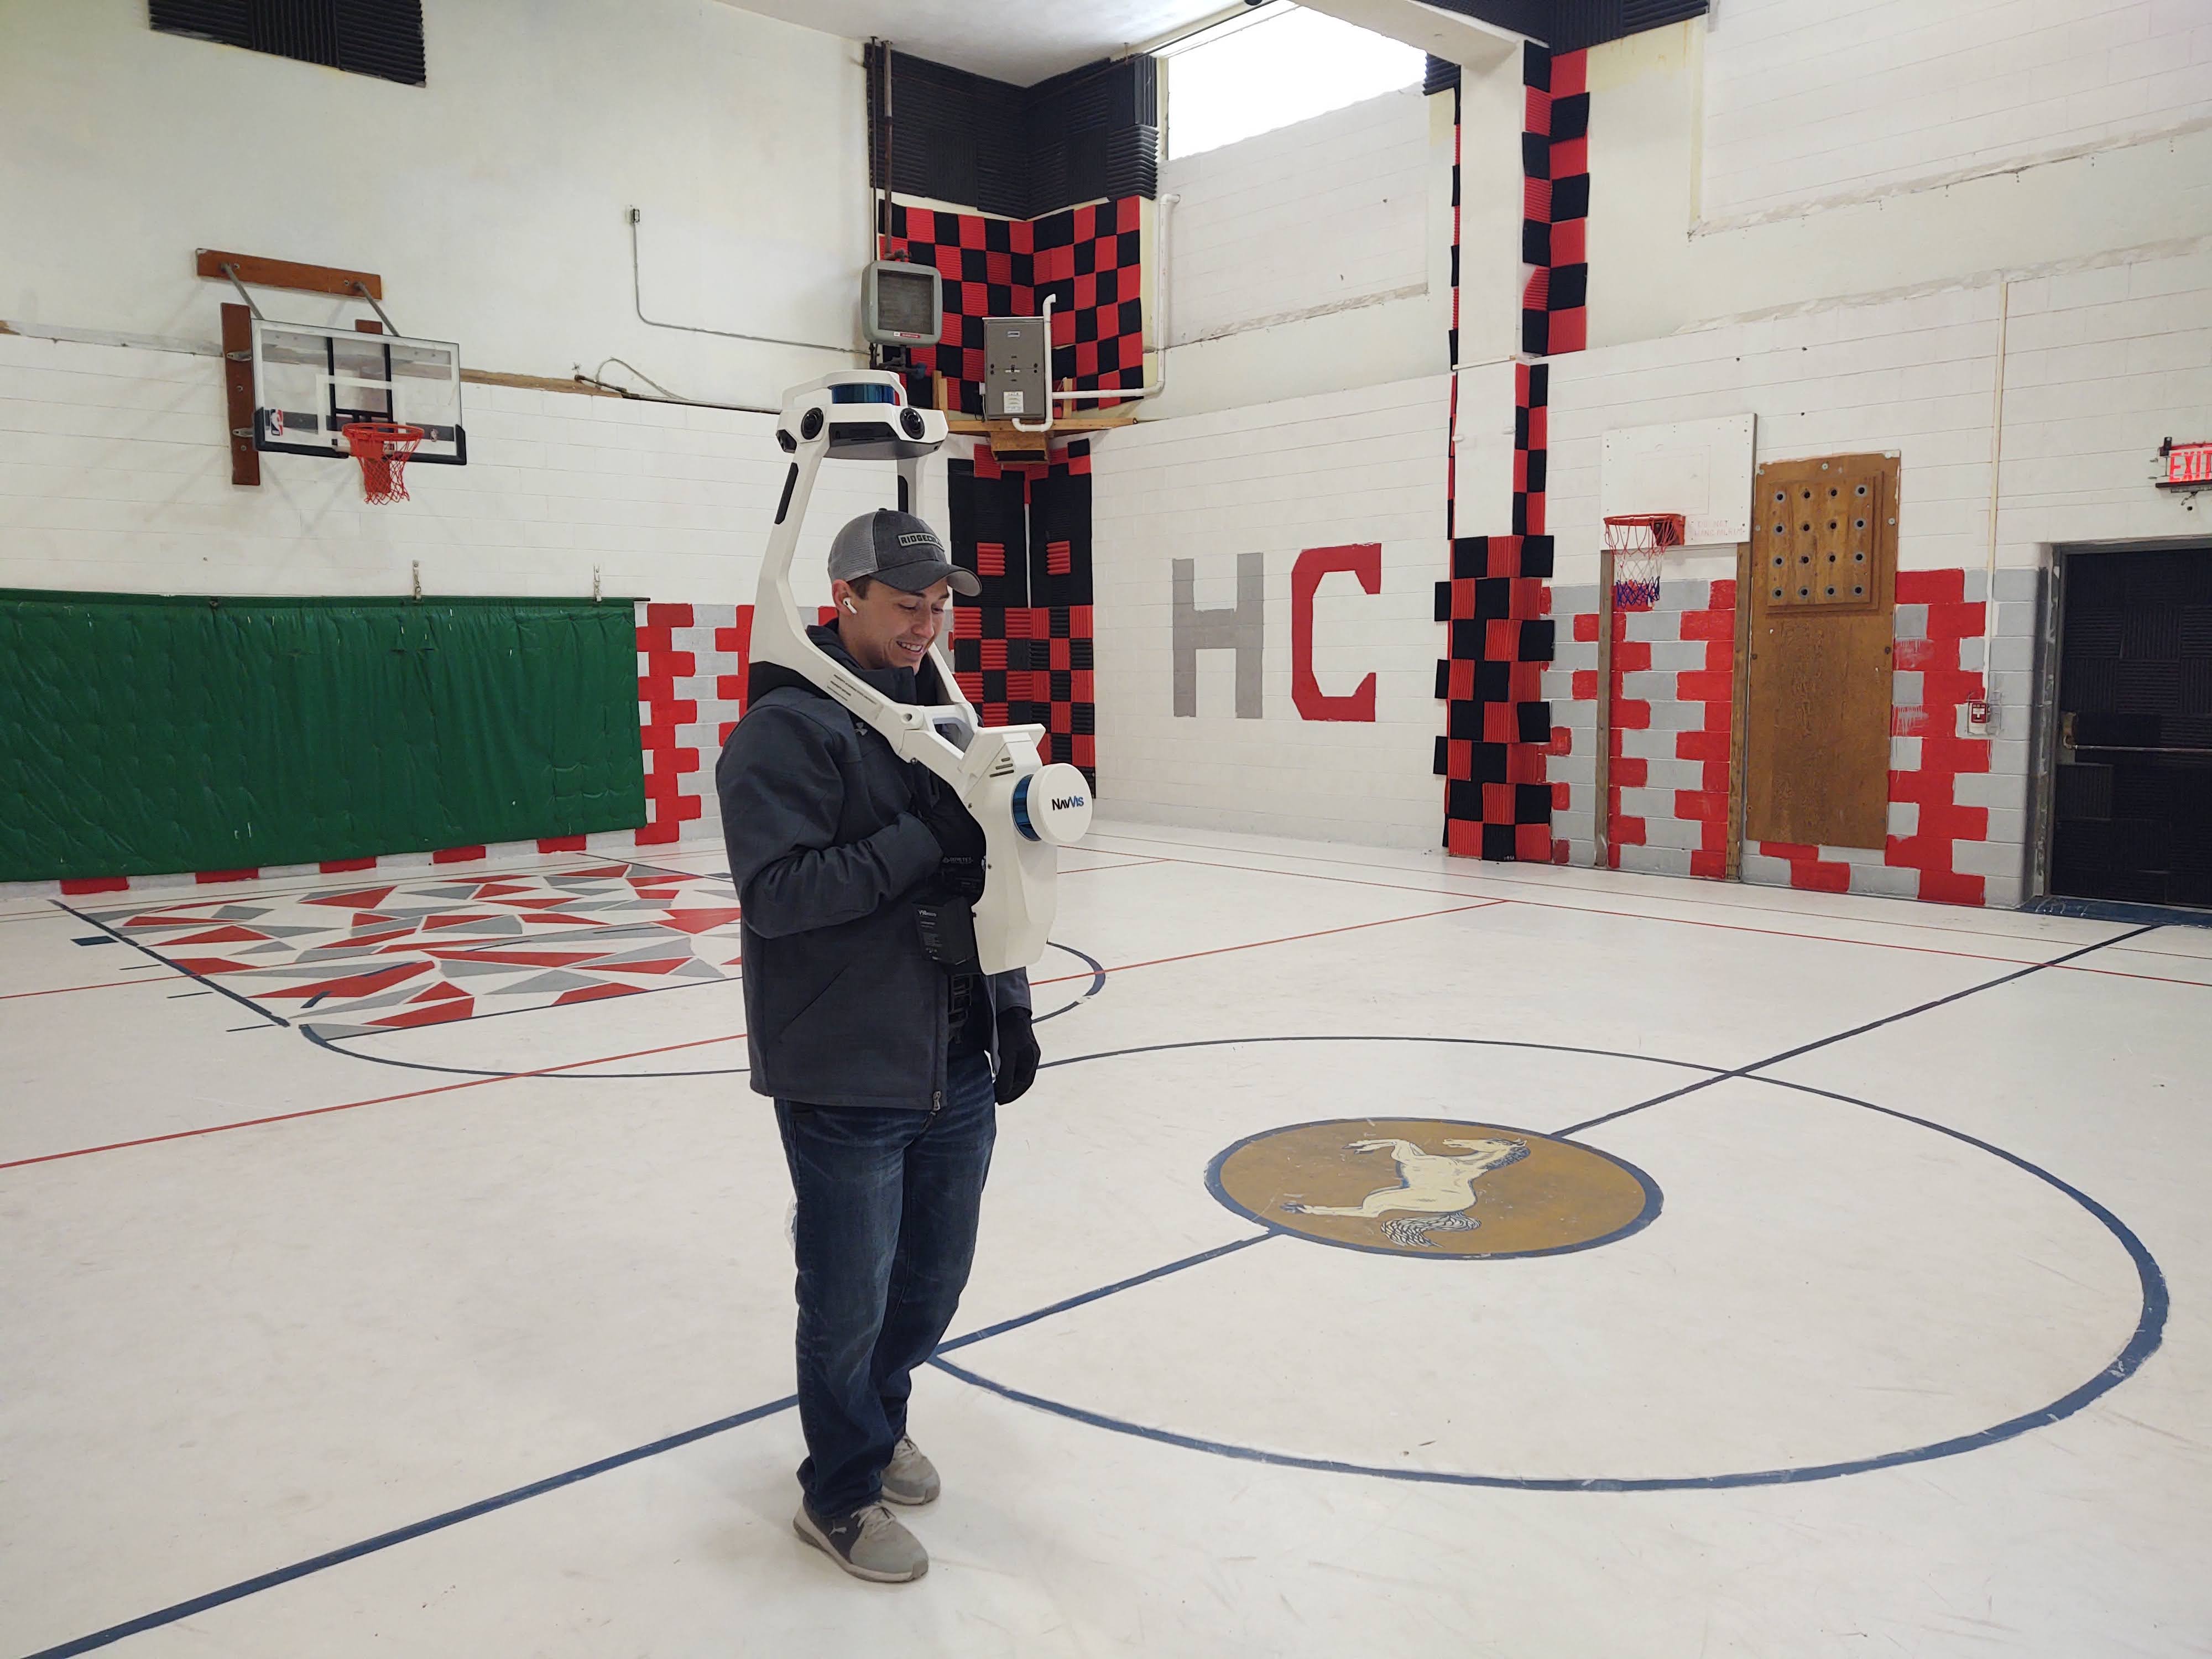 Jacob Picolet, senior engineer with the Technology Development Institute at Kansas State University, uses a shoulder-mounted NavVis VLX digital scanning system to image the interior of the Memorial School Building in Hill City.